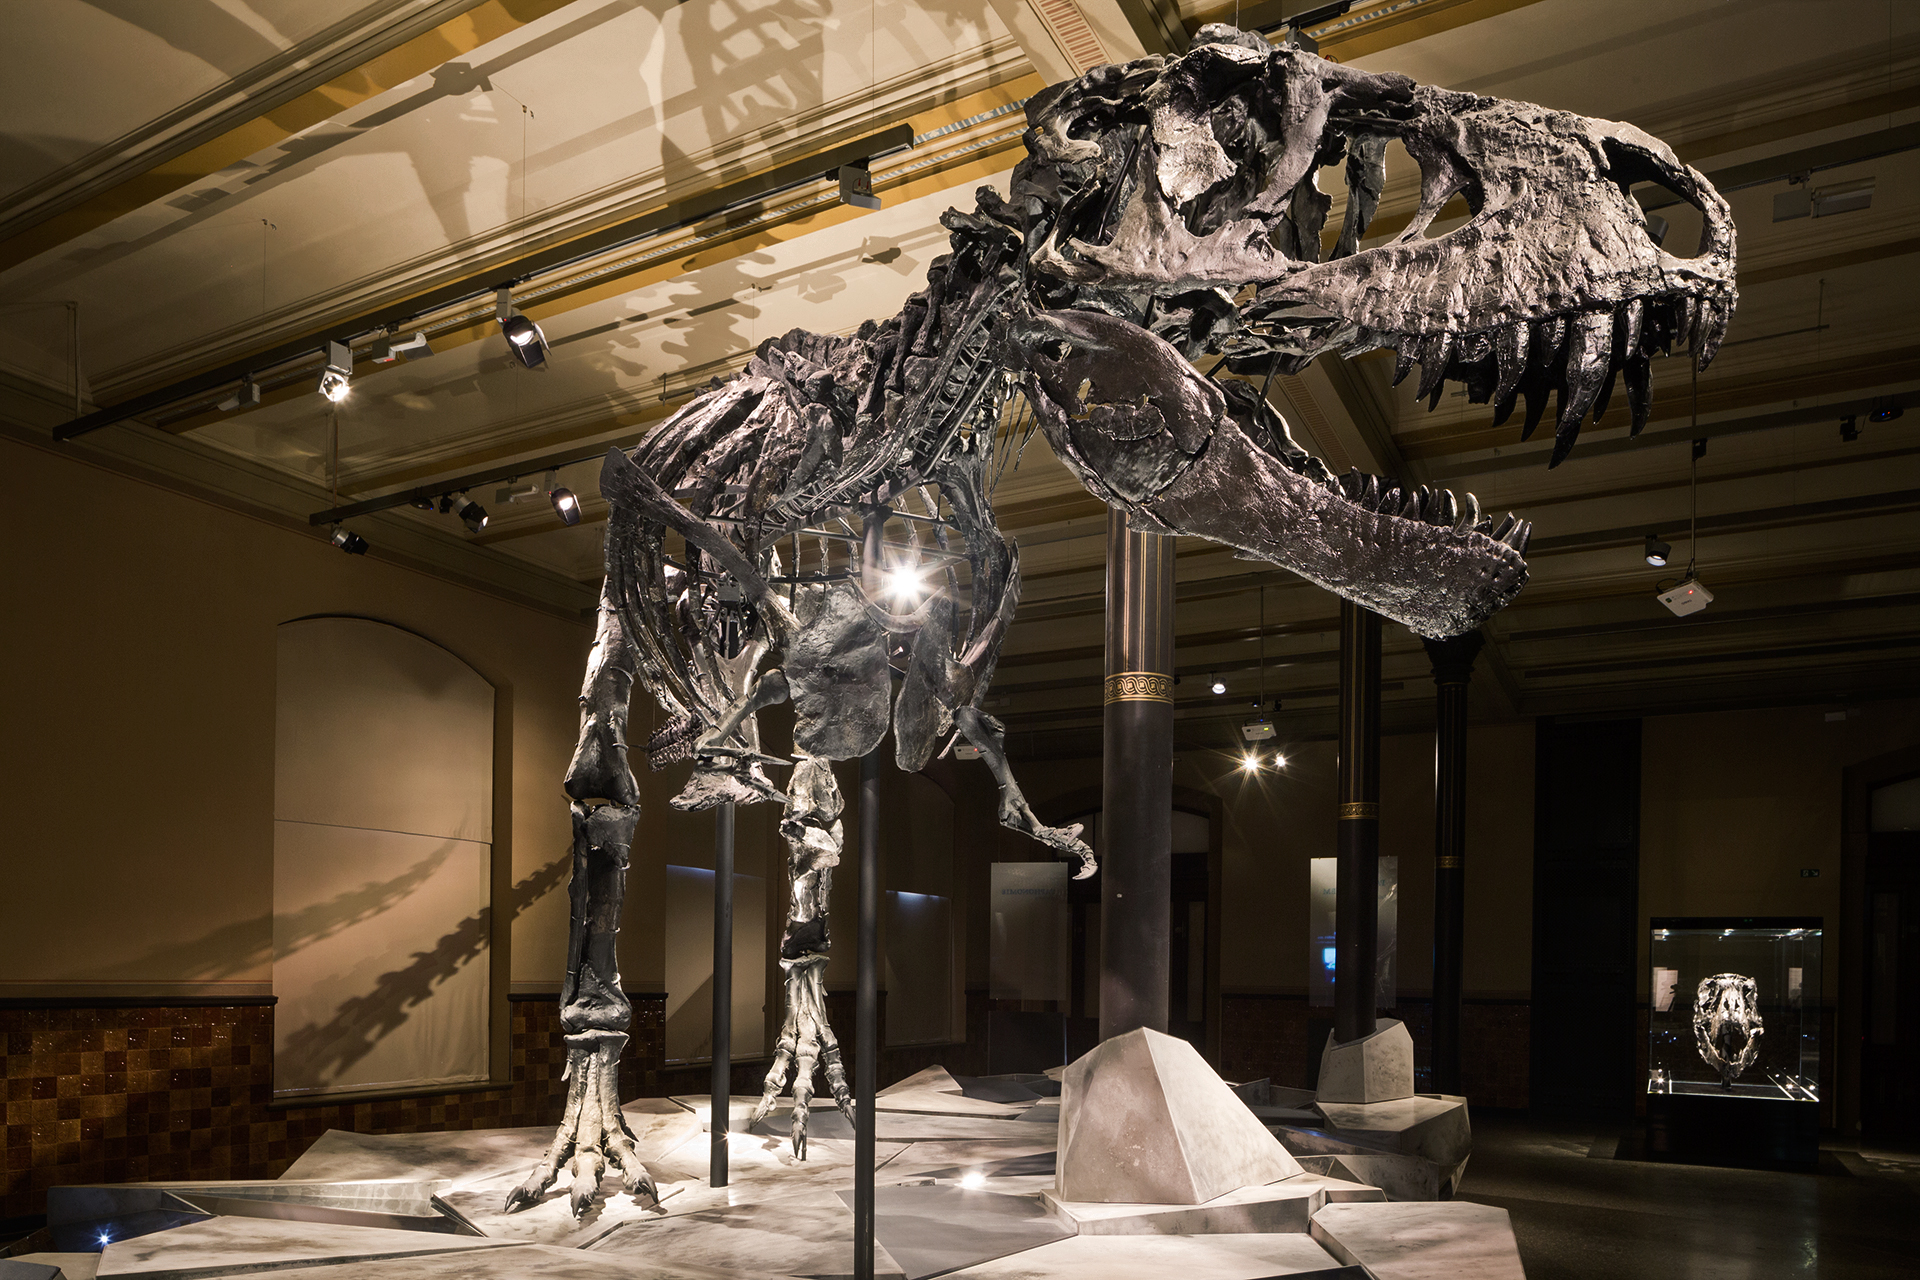  Tristan, the only complete T-Rex skeleton in Europe, has been displayed at Berlin’s Natural History Museum since October 2015.  Berlin, Germany.  